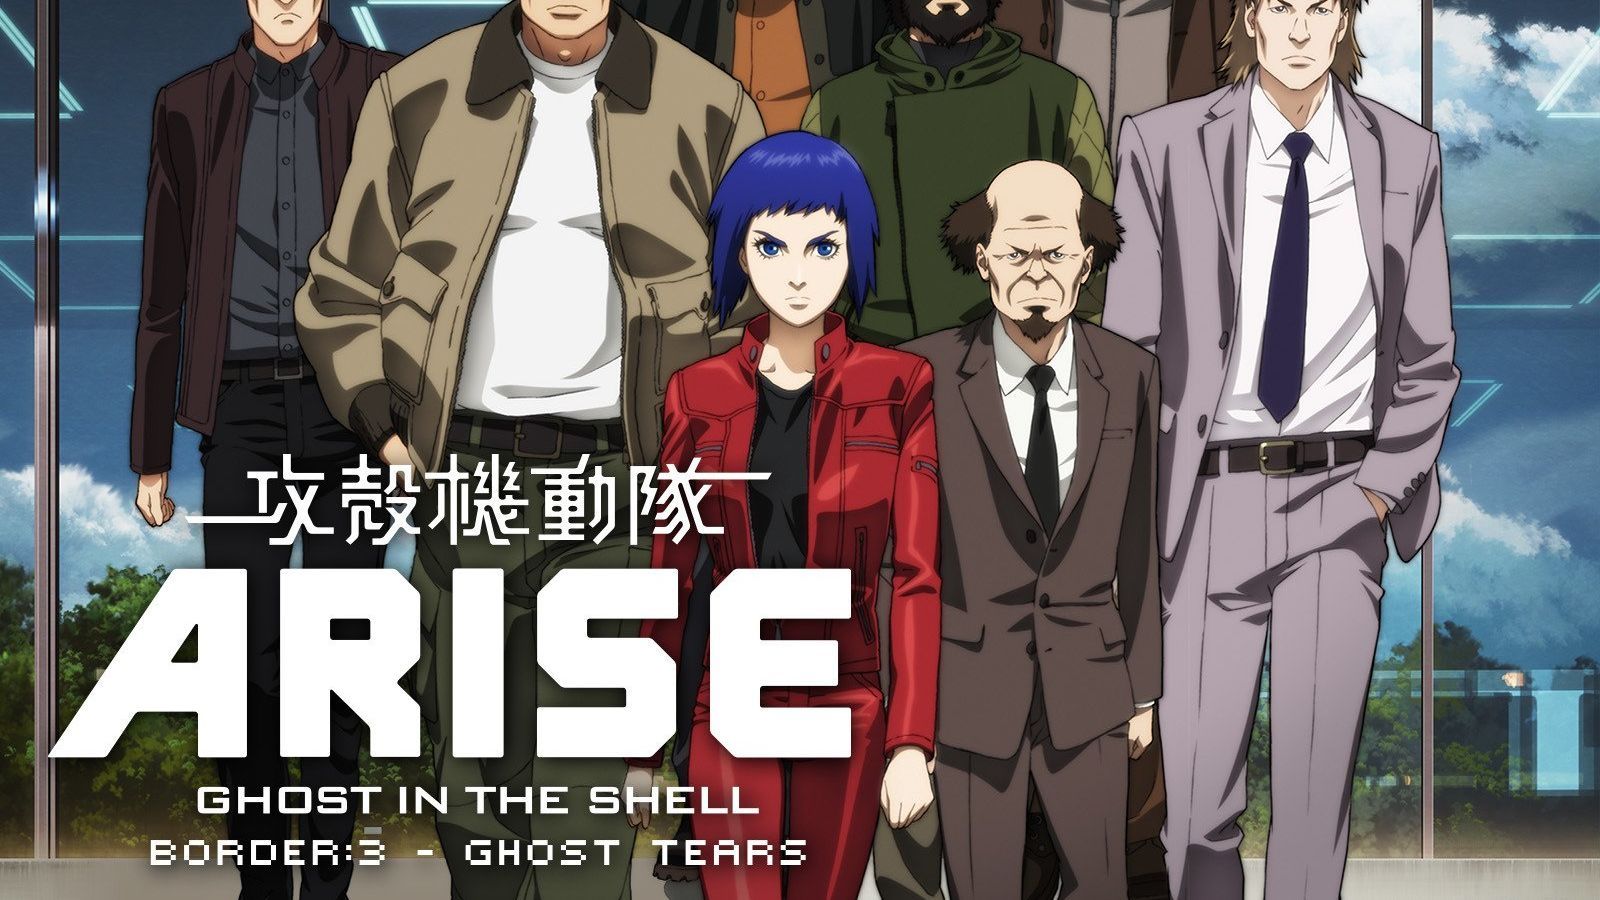 Anime Review: 'Ghost in the Shell: Arise' (2013) OVA - HubPages